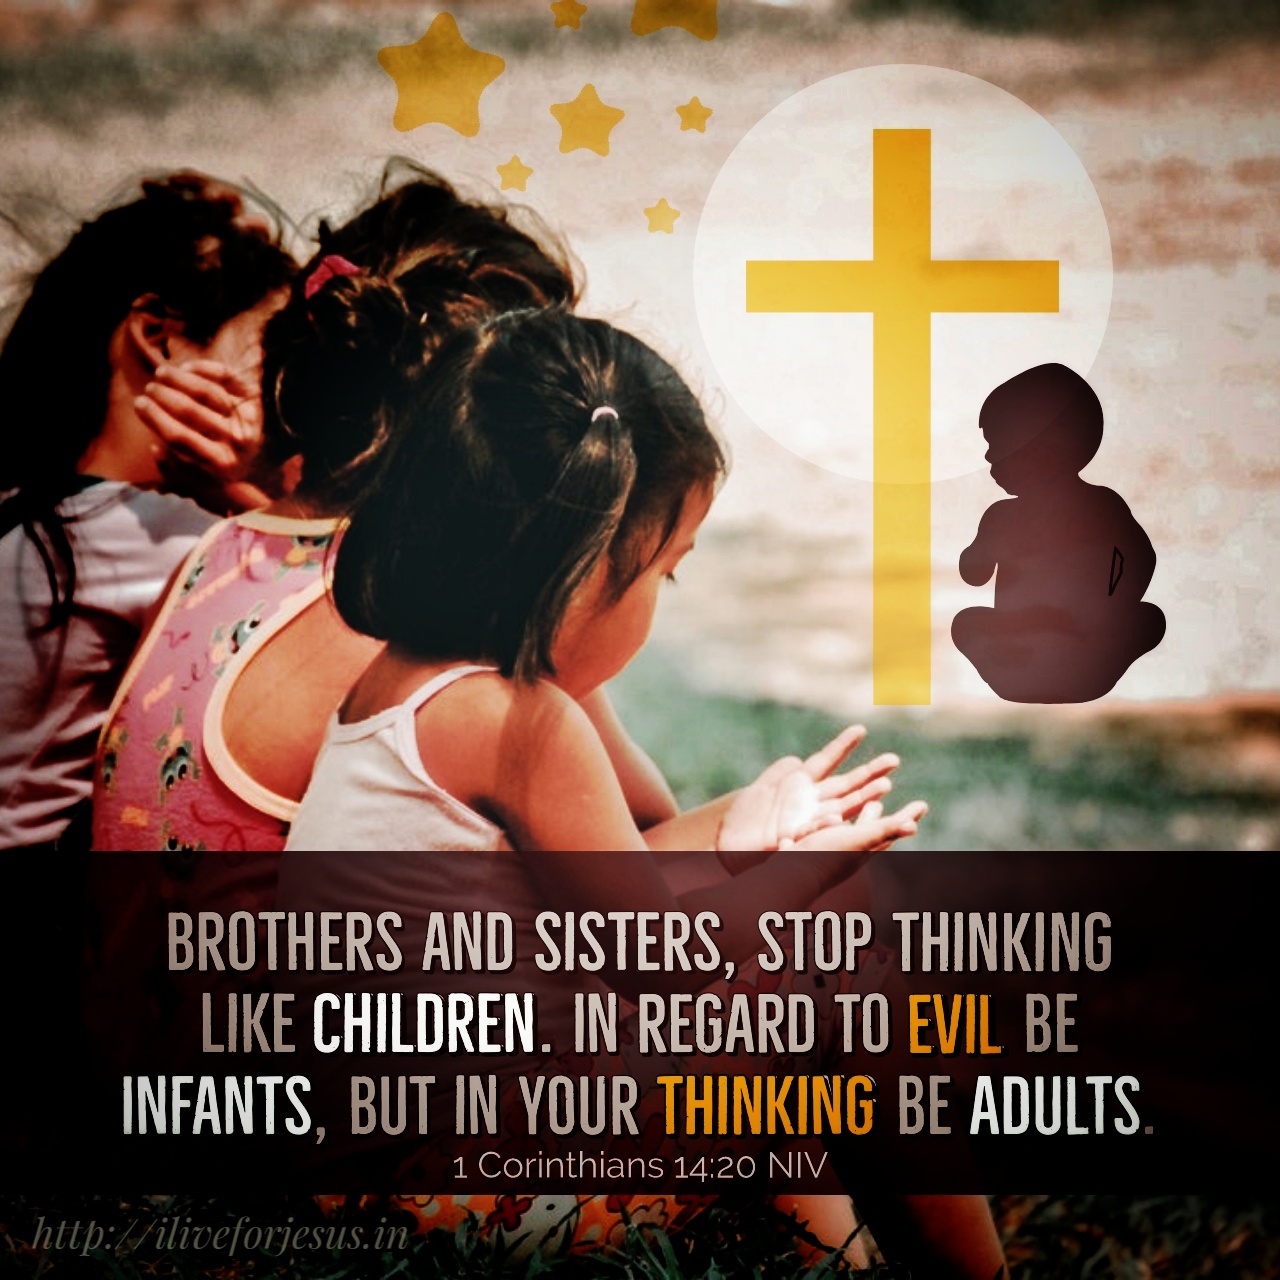 Brothers and sisters, stop thinking like children. In regard to evil be infants, but in your thinking be adults. 1 Corinthians 14:20 NIV